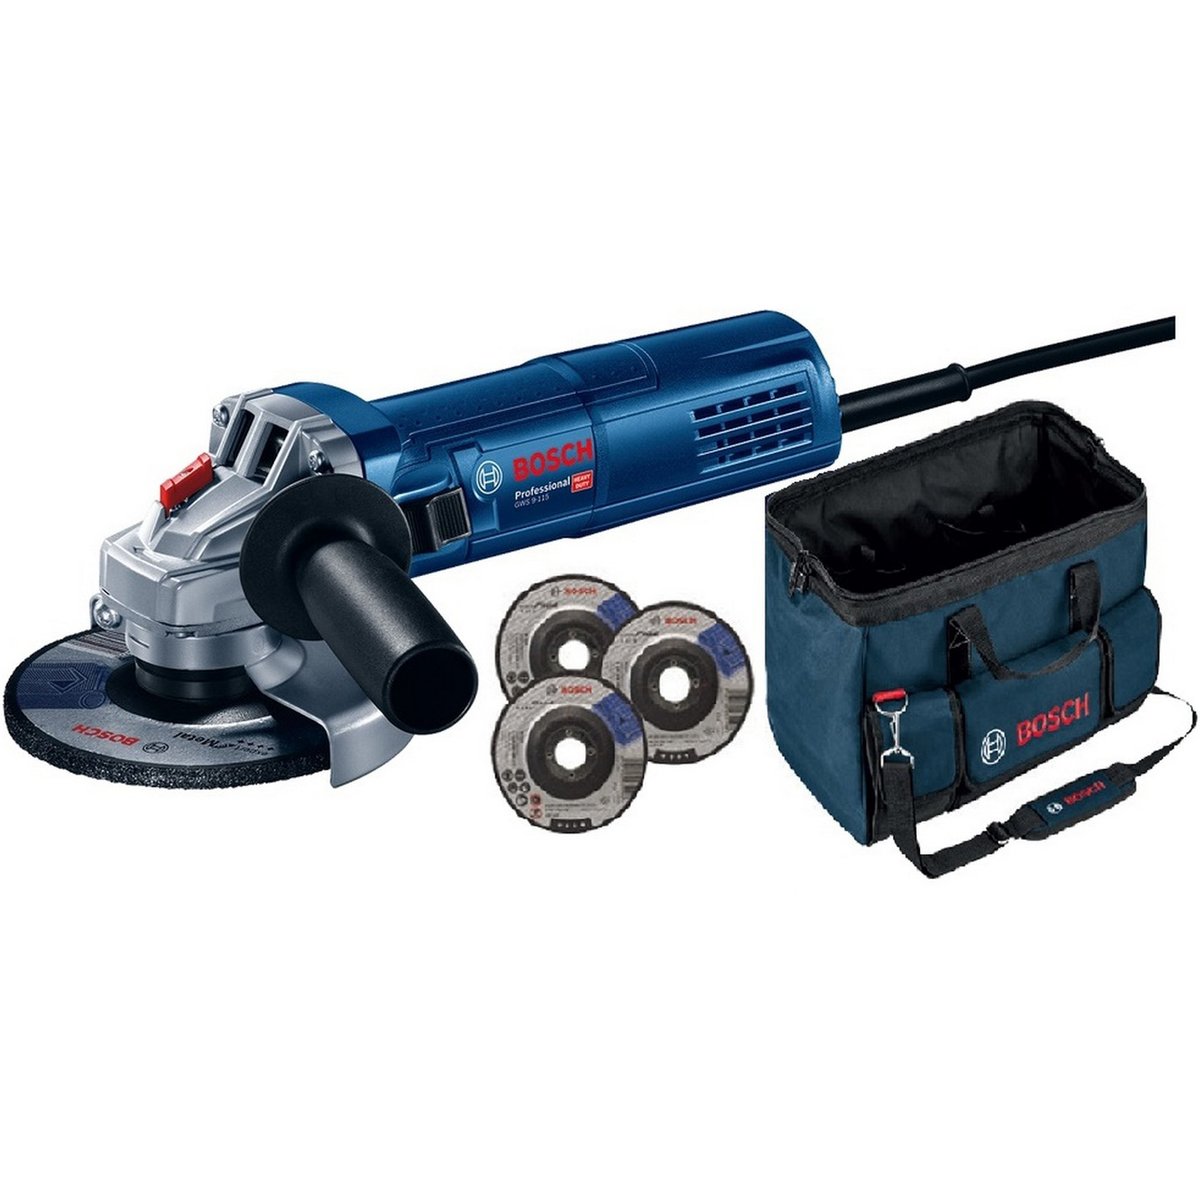 Bosch Professional Angle Grinder GWS9-115 900W With Tool Bag + 3Discs